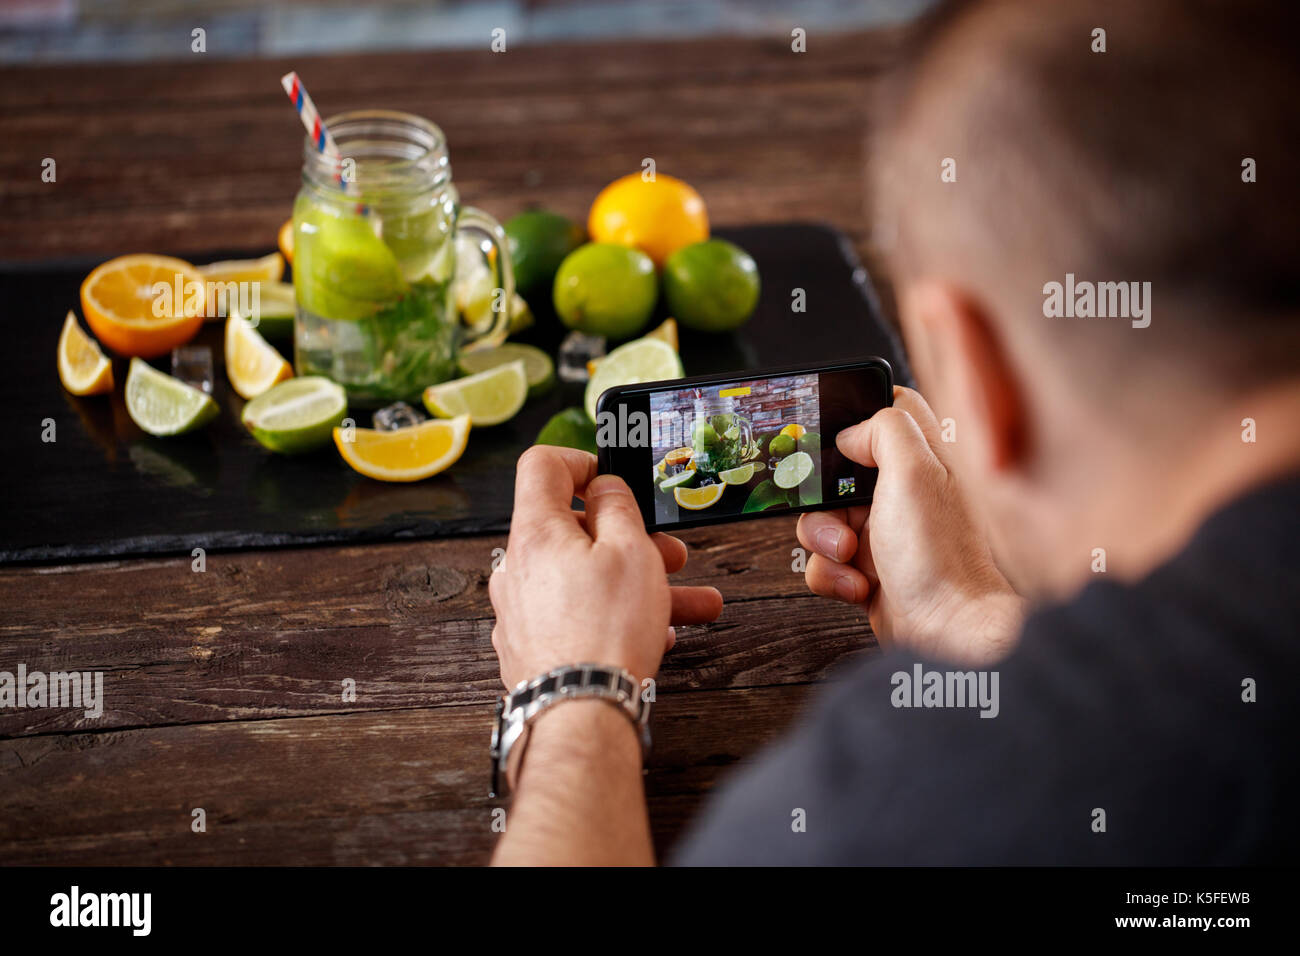 man taking photo on smartphone of mojito drink Stock Photo